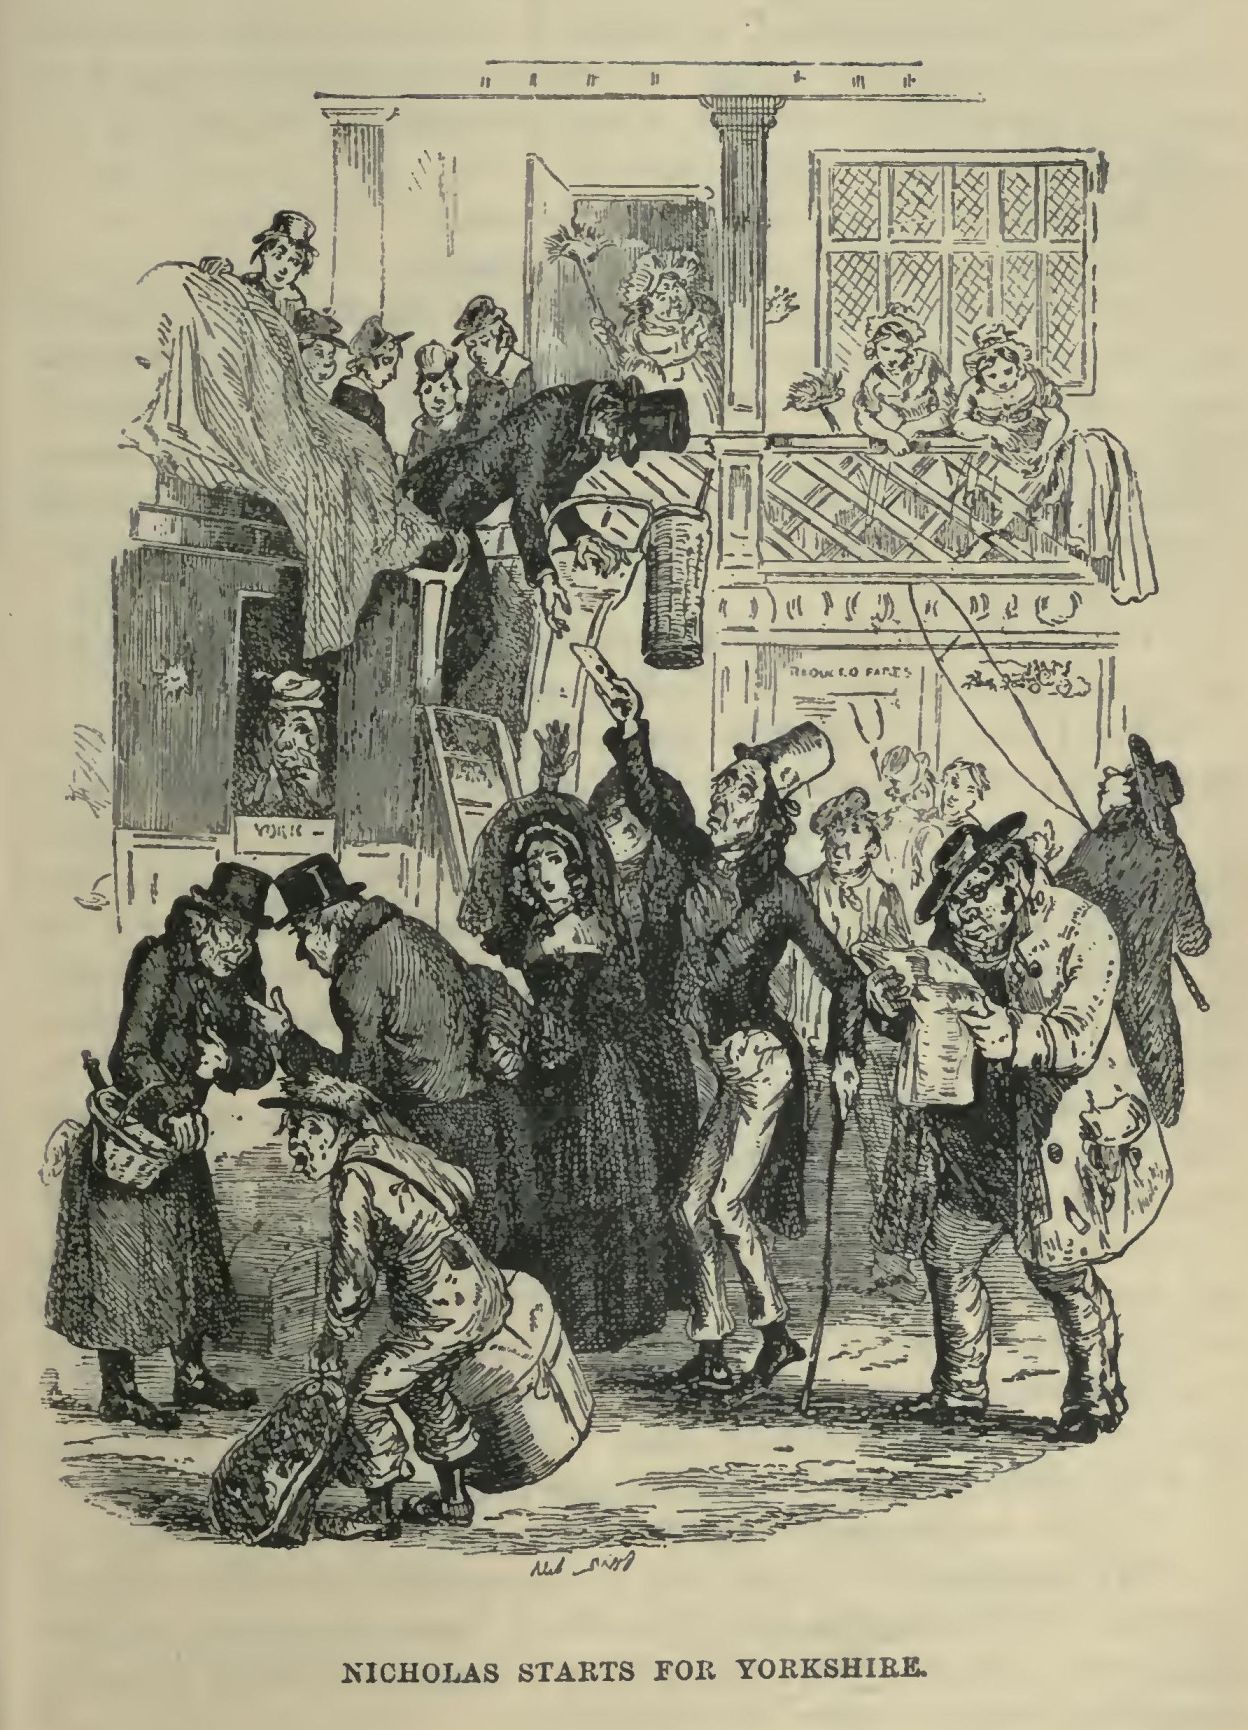 The Life and Adventures of Nicholas Nickleby, by Charles Dickens